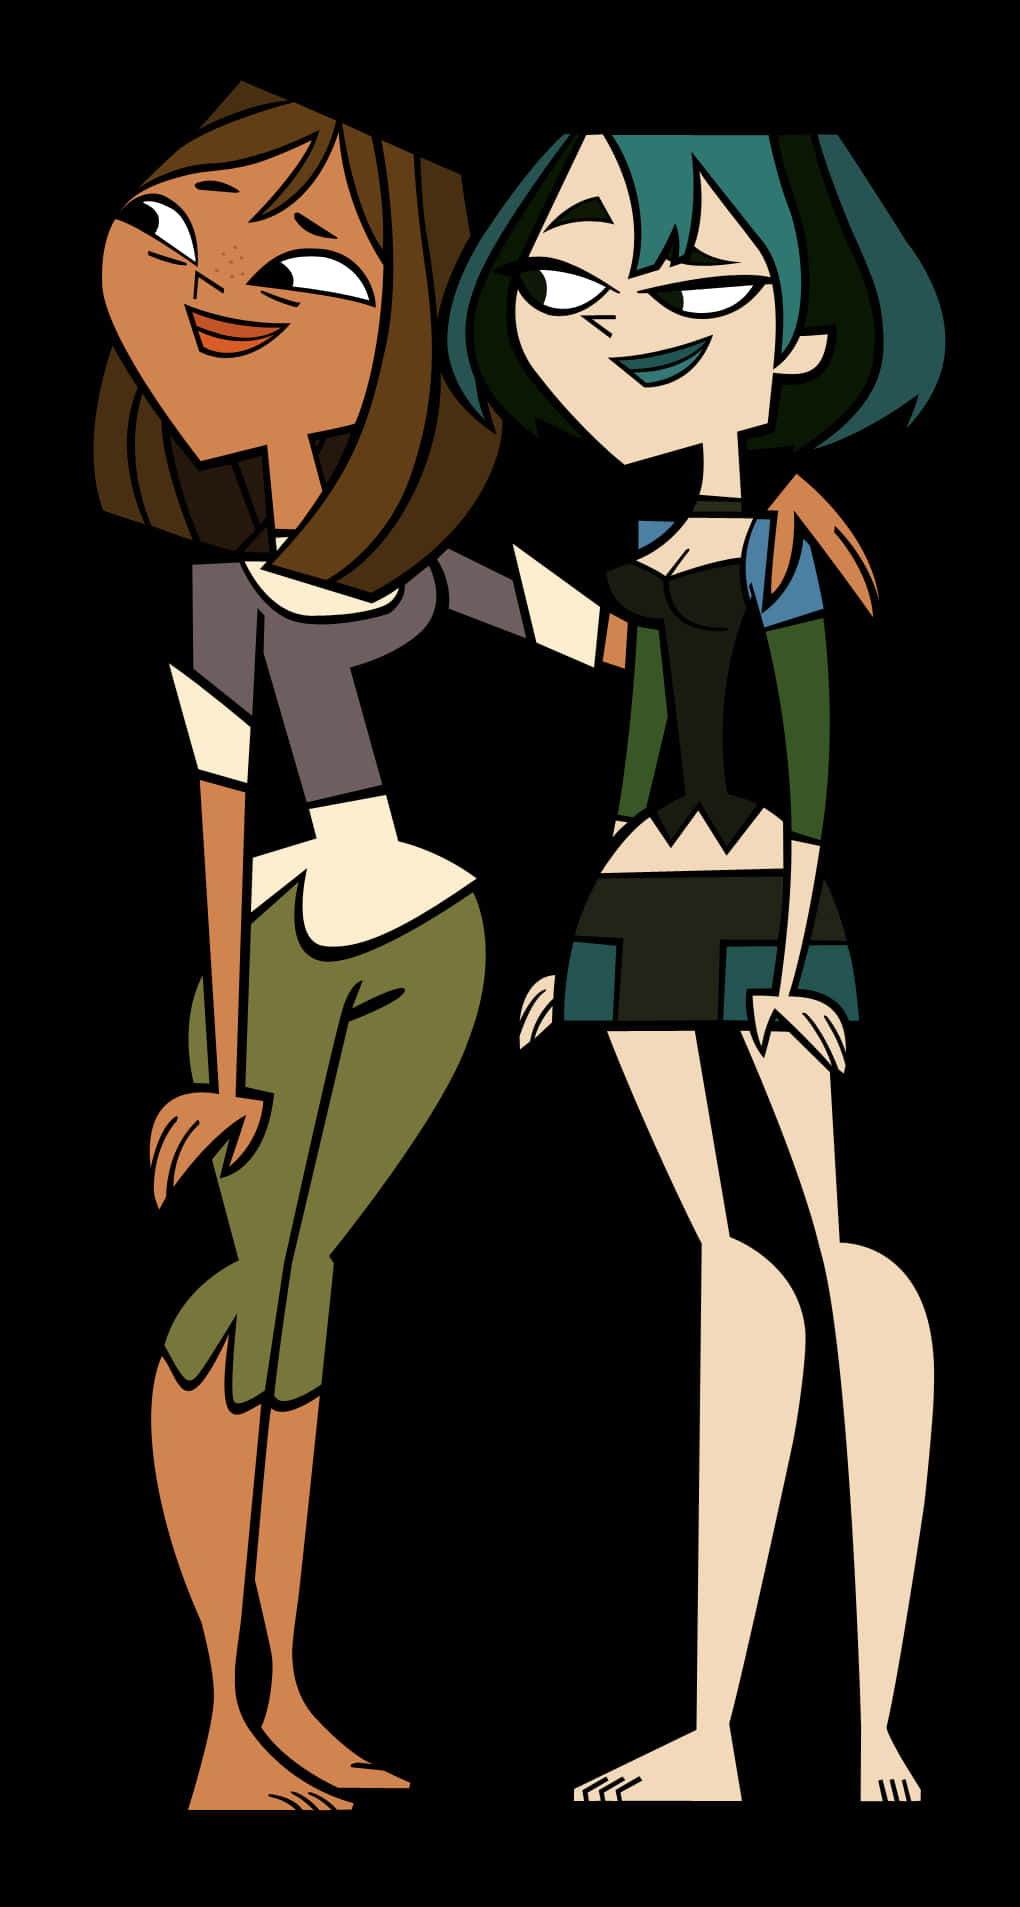 Dive into the fun and drama with Total Drama!